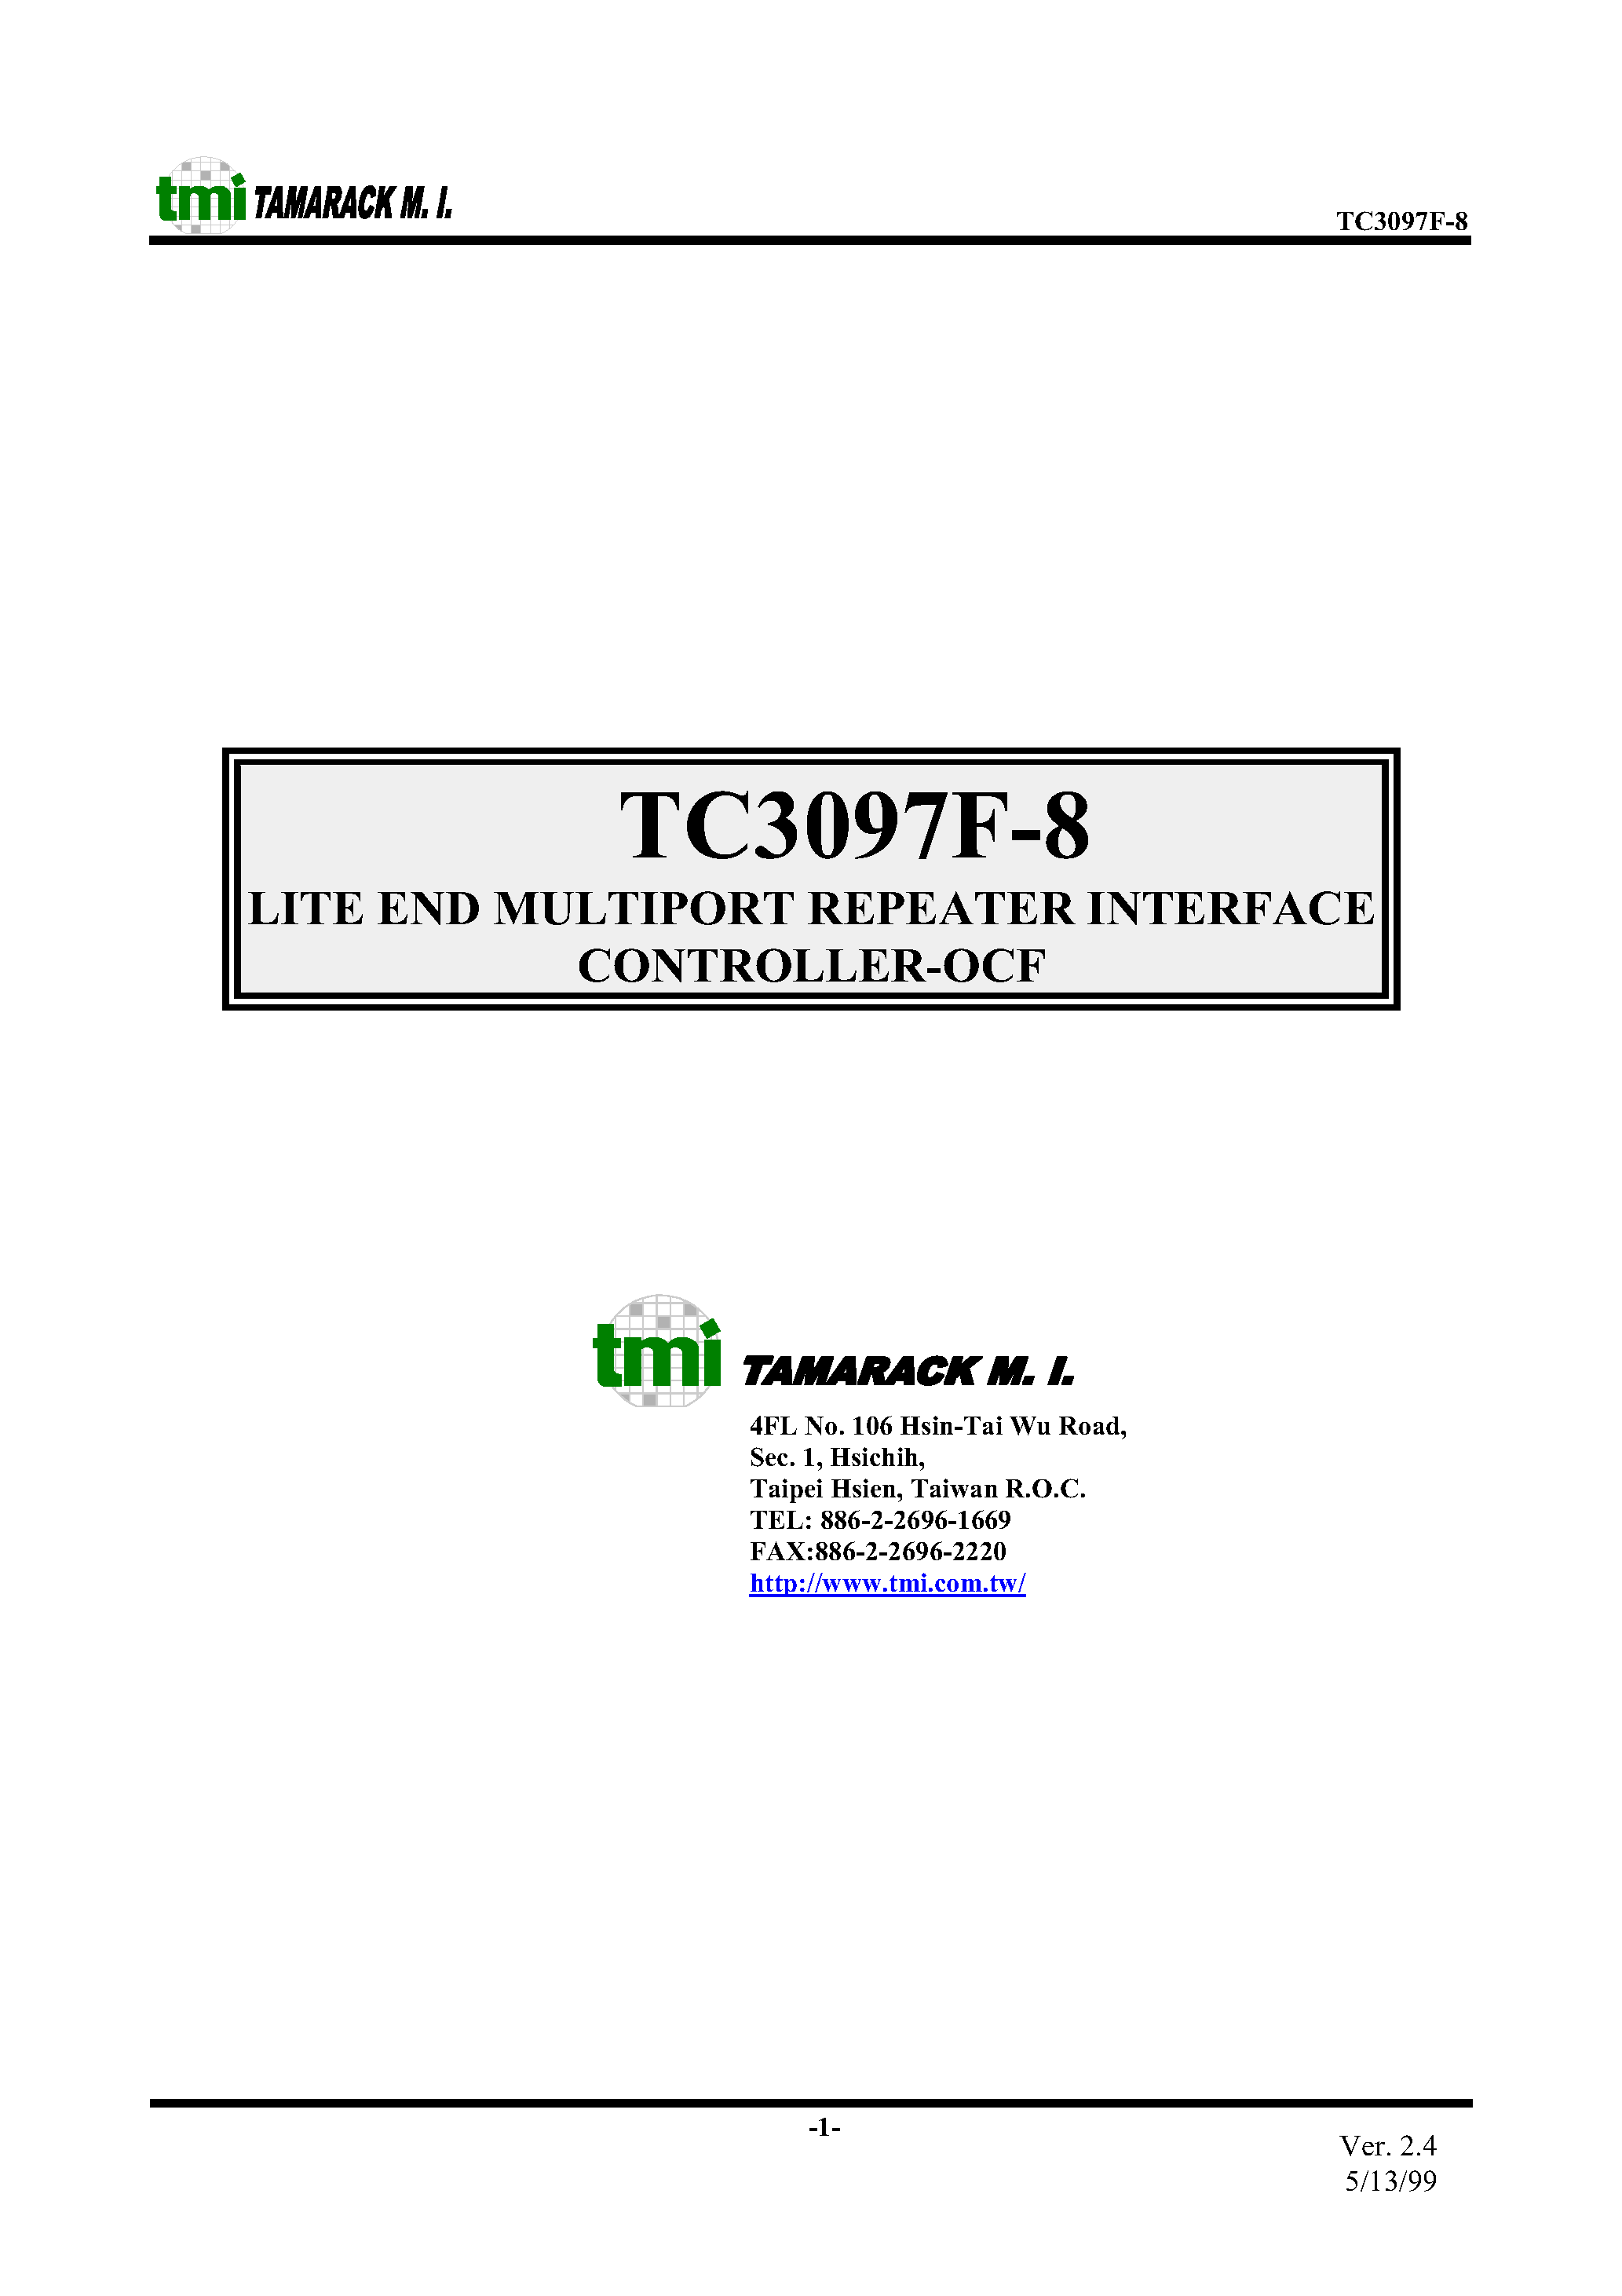 Datasheet TC3097F-8 - LITE END MULTIPORT REPEATER INTERFACE CONTROLLER - OCF page 1